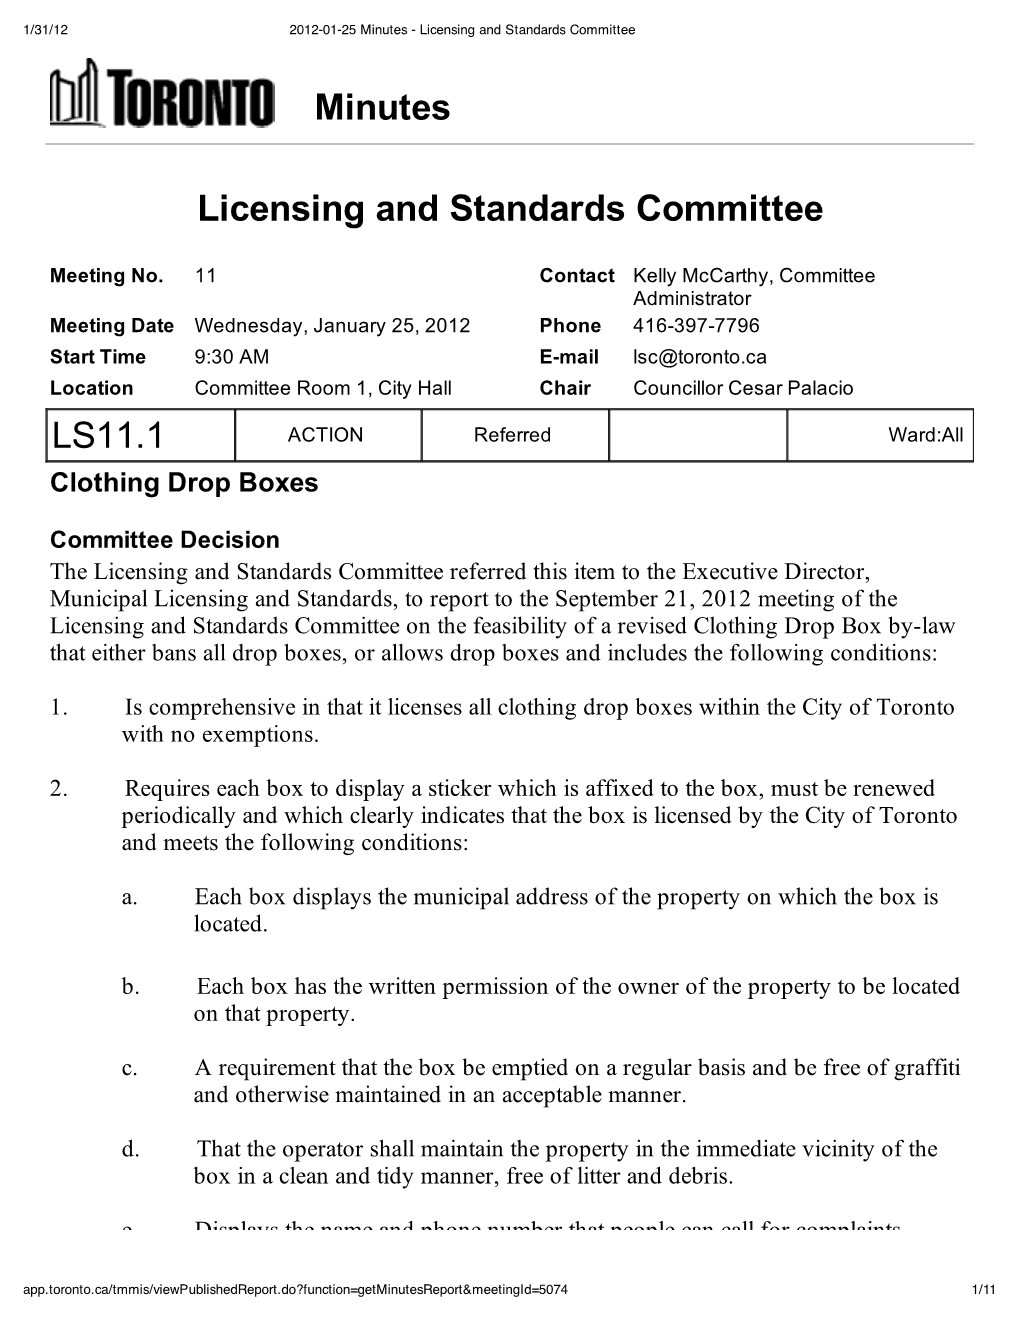 Minutes Licensing and Standards Committee LS11.1